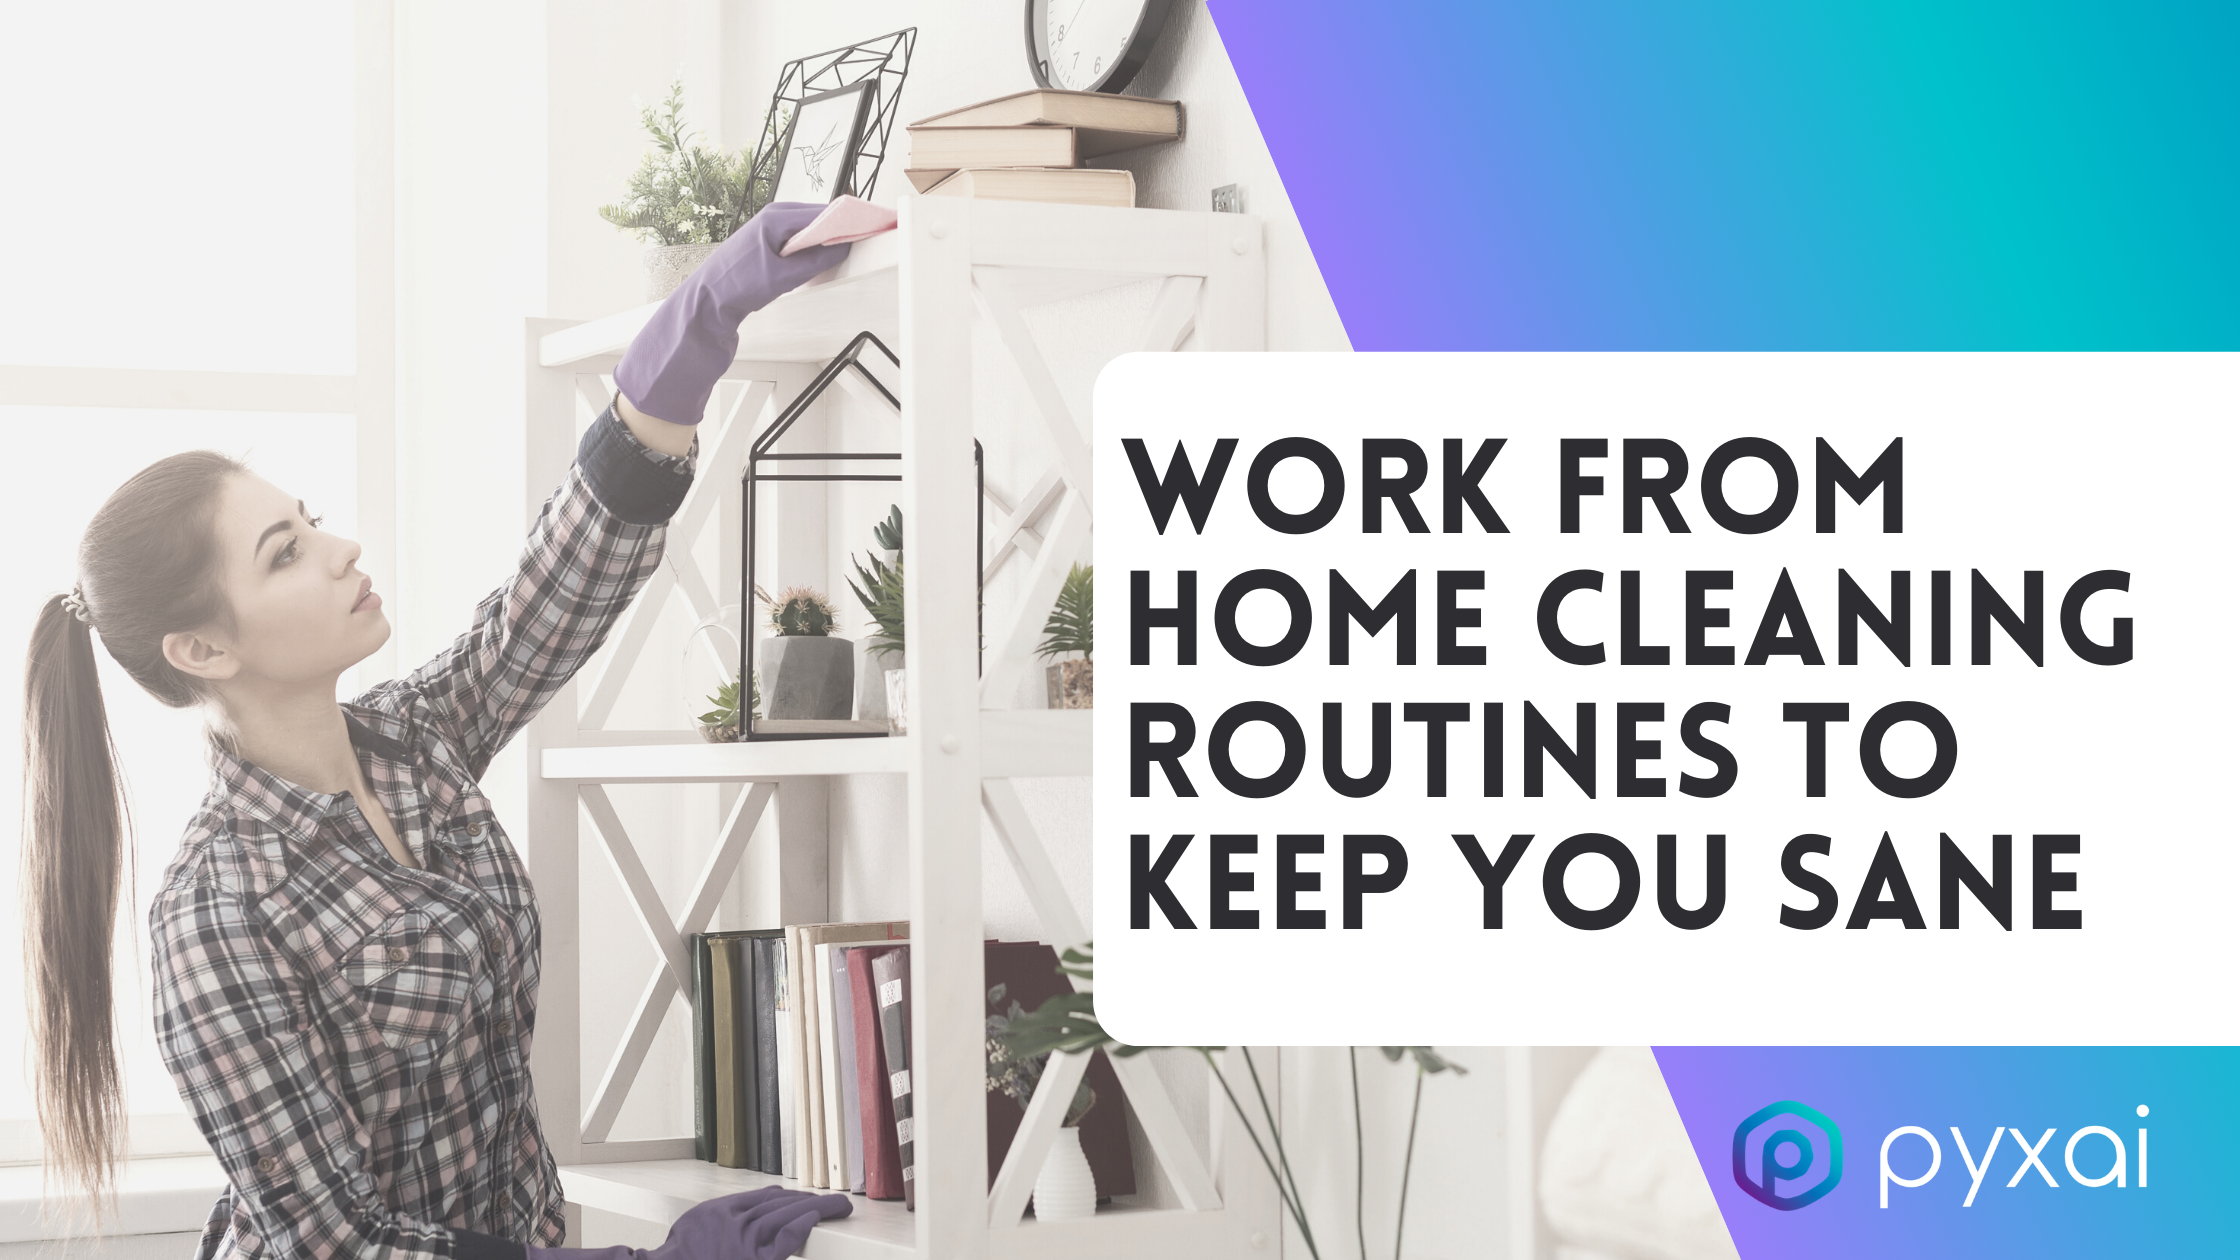 Work From Home Cleaning Routines to Keep You Sane